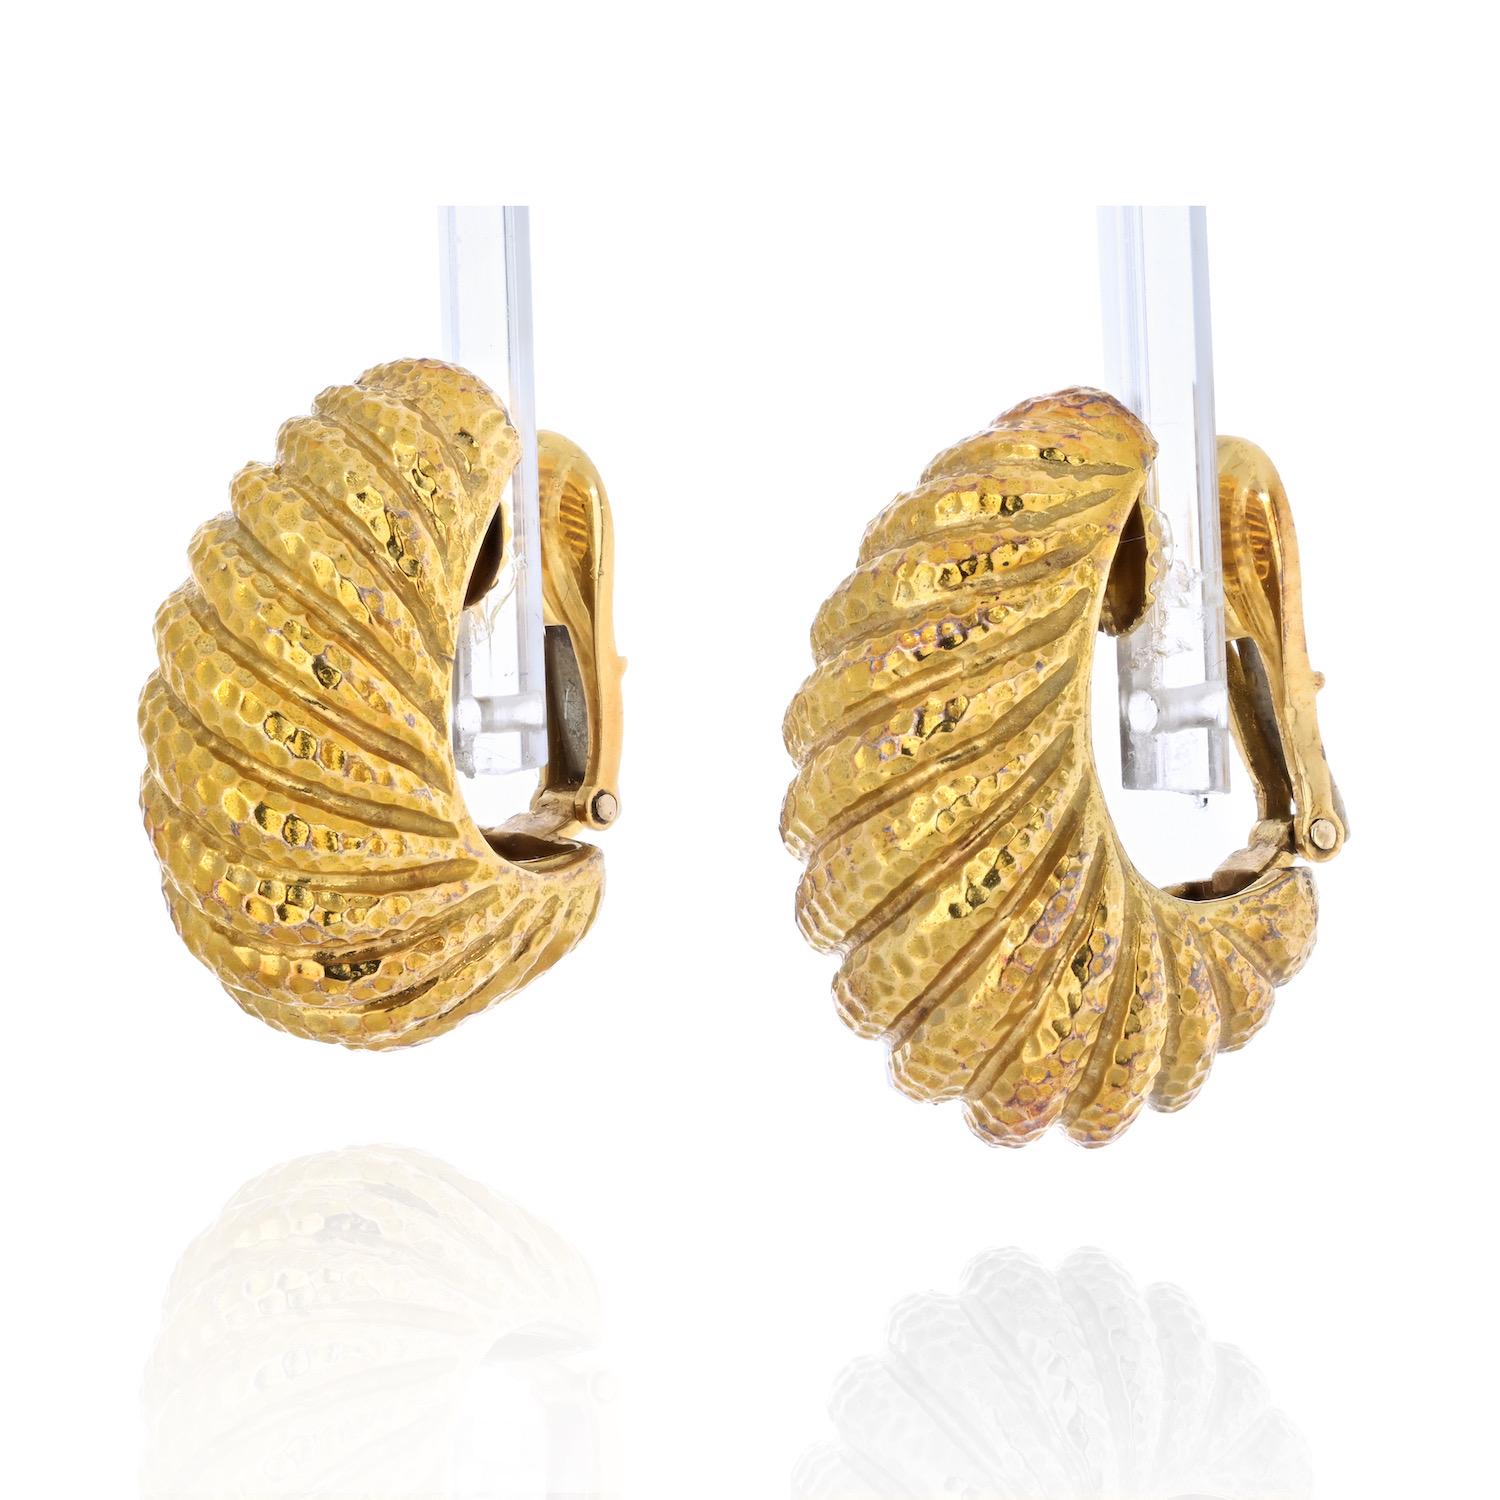 Classic rigid David Webb shrimp earrings are a staple and will continue being such for many years to come. Just like 50 years ago women loved simple gold earrings of all shapes and forms the same love remains today and we are happy to offer these